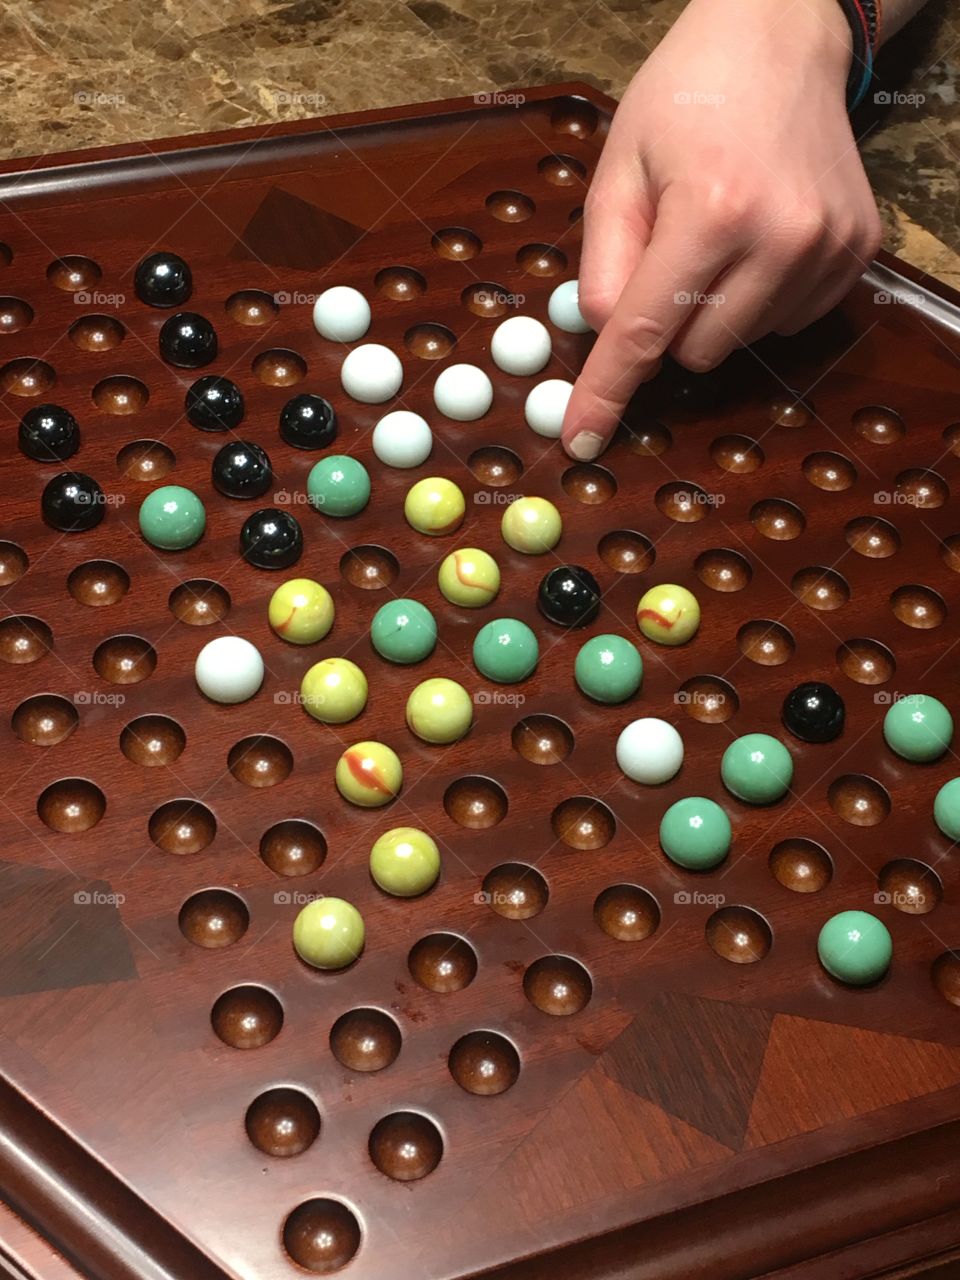 Playing Chinese checkers 